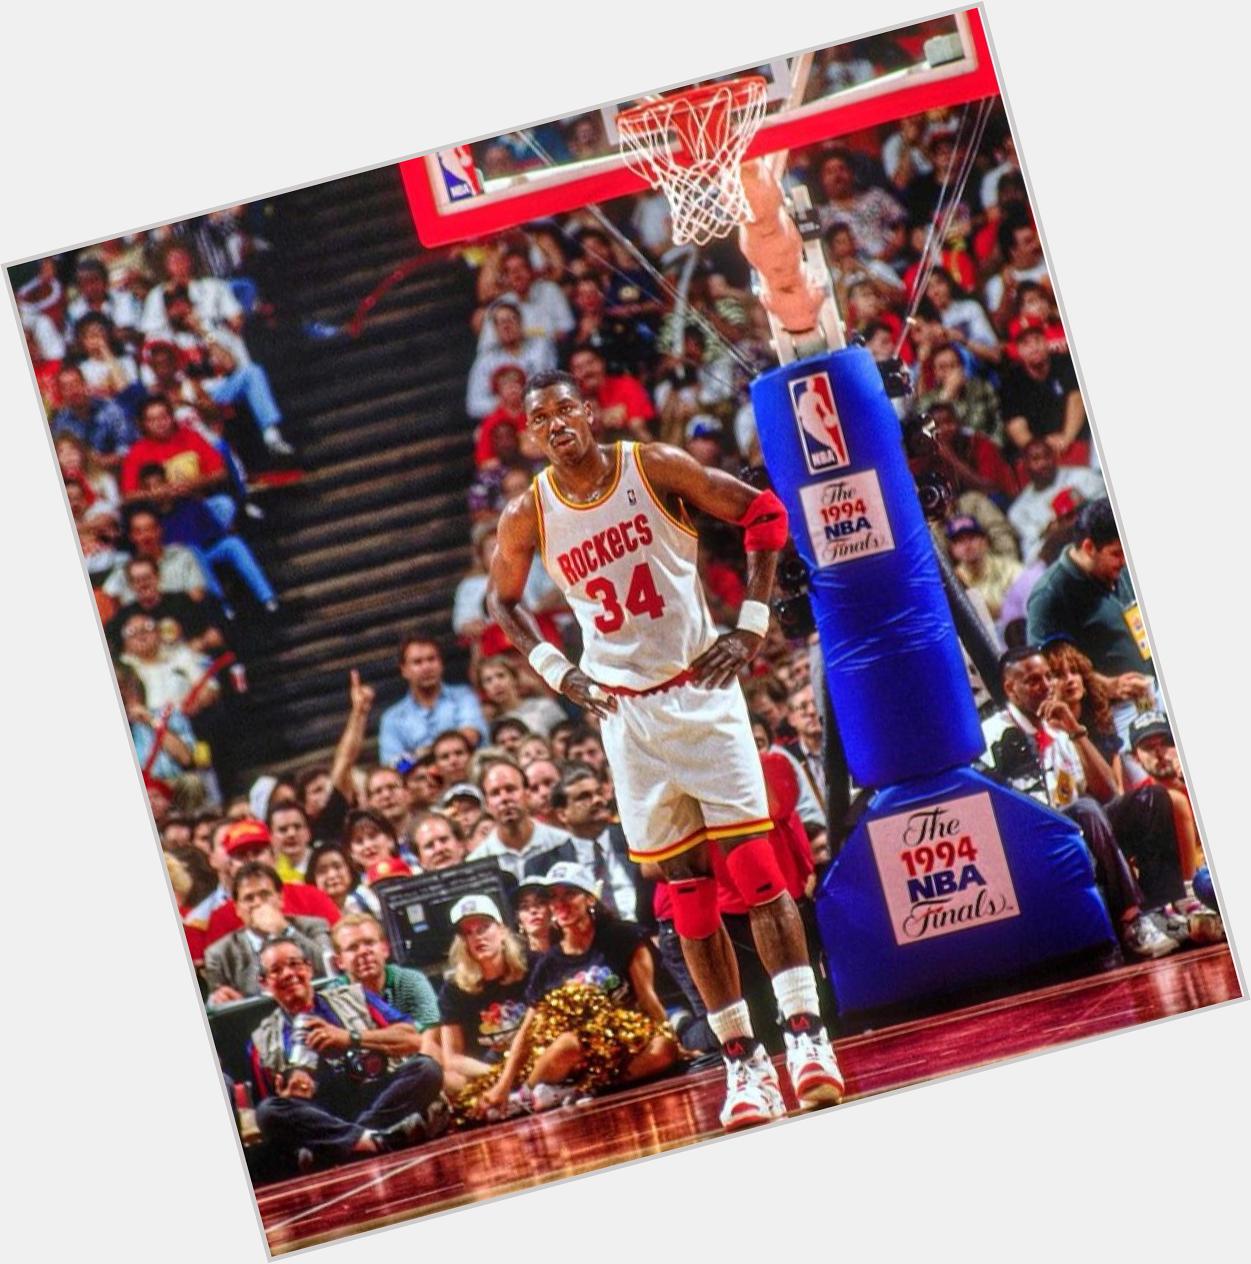 Almost forgot to wish the greatest center to ever play the game Hakeem Olajuwon a happy birthday! 